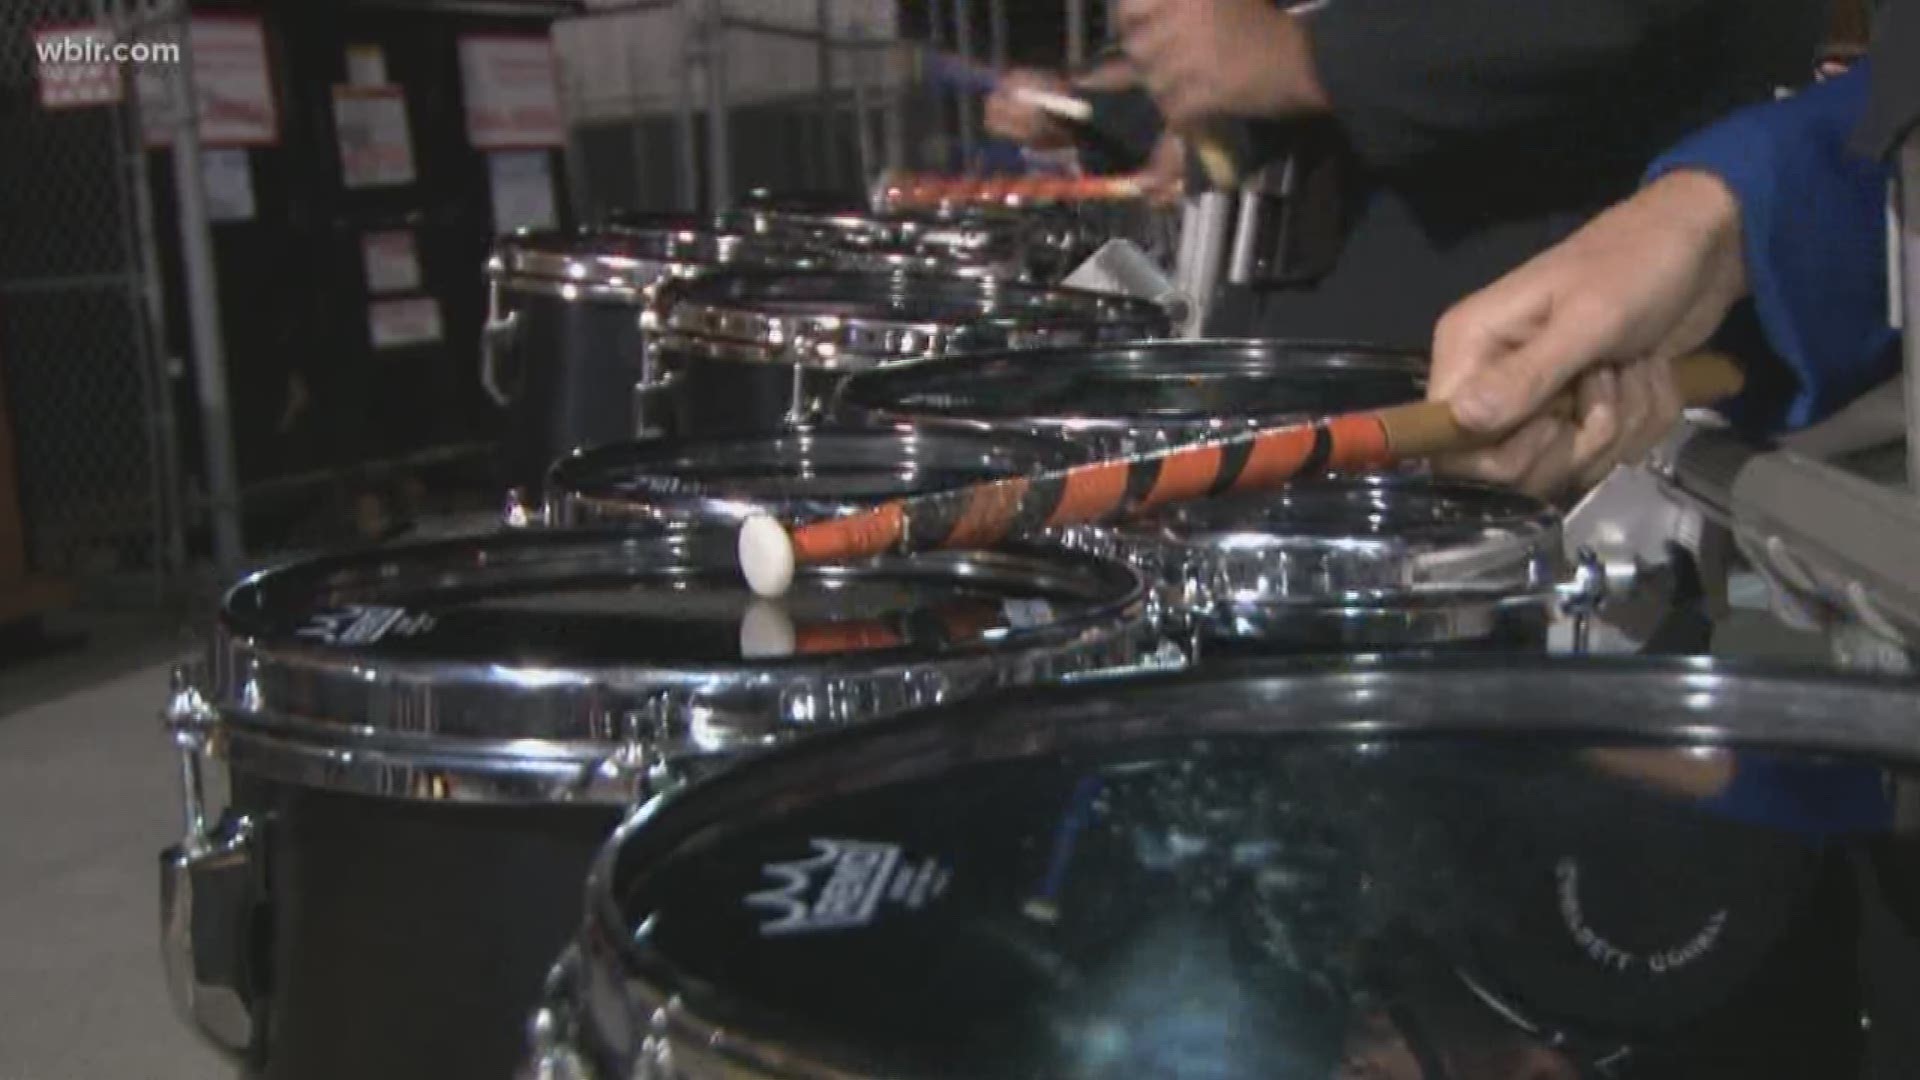 Campbell county band joins 10Sports Blitz.